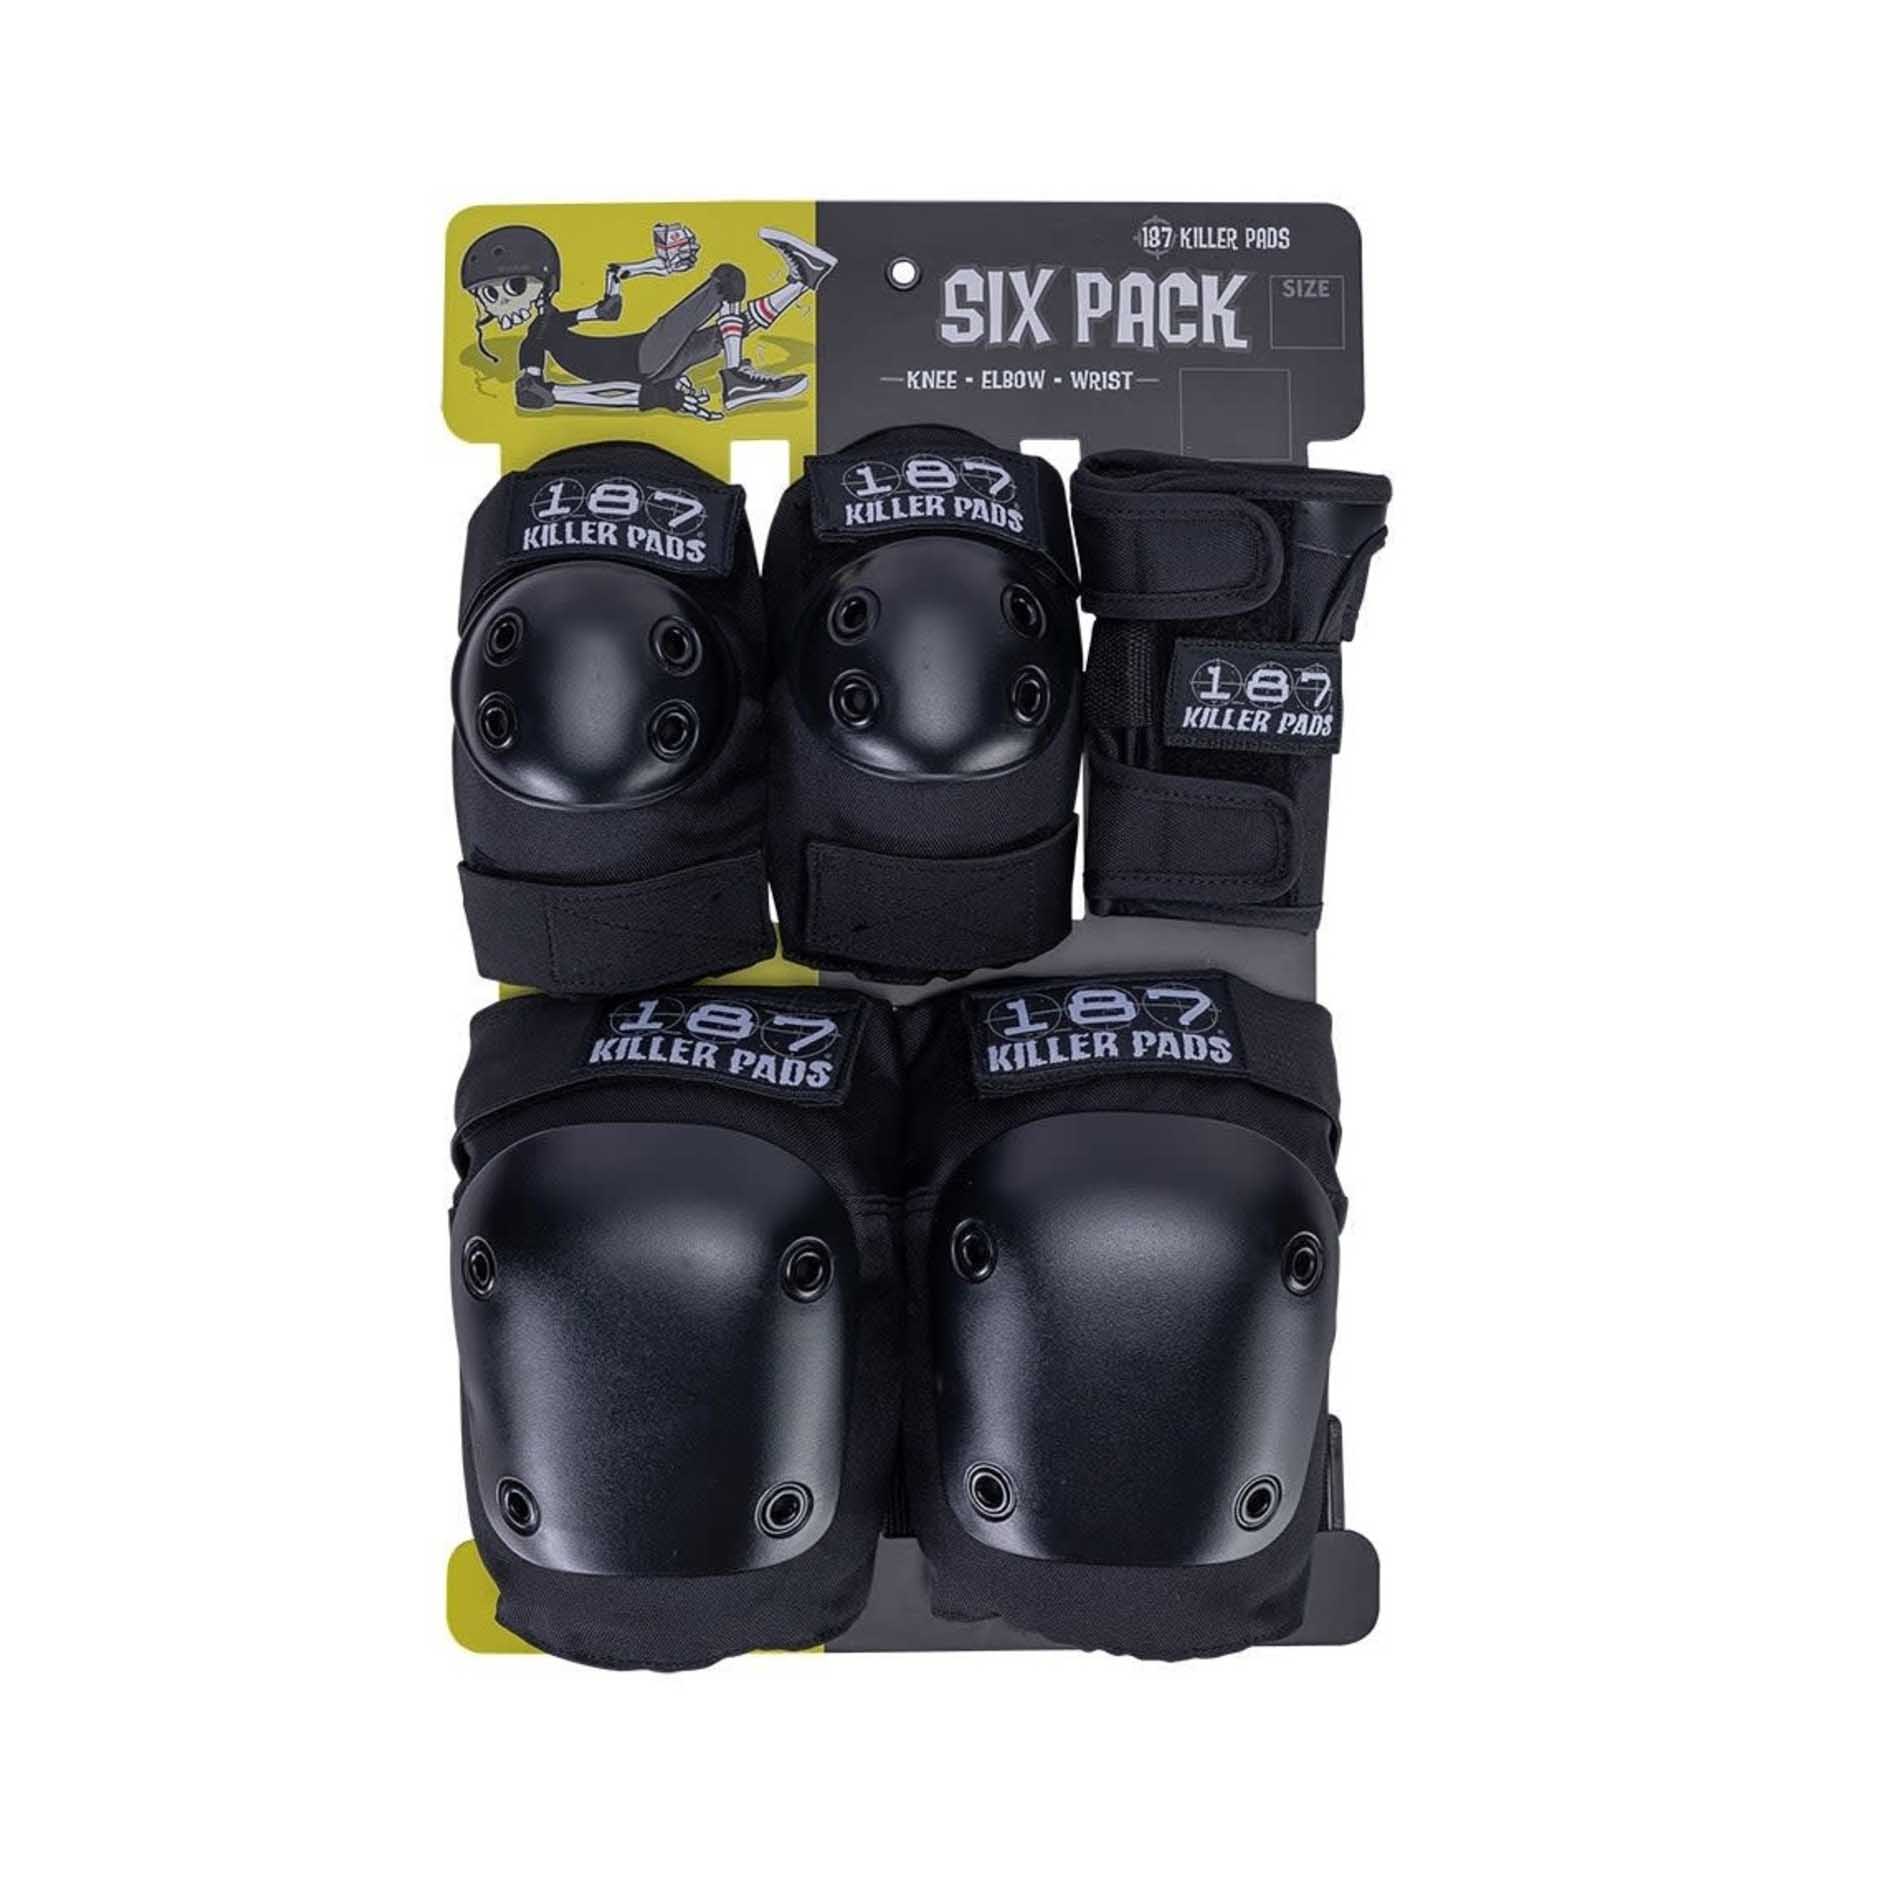 187 Six Pack Protection Set